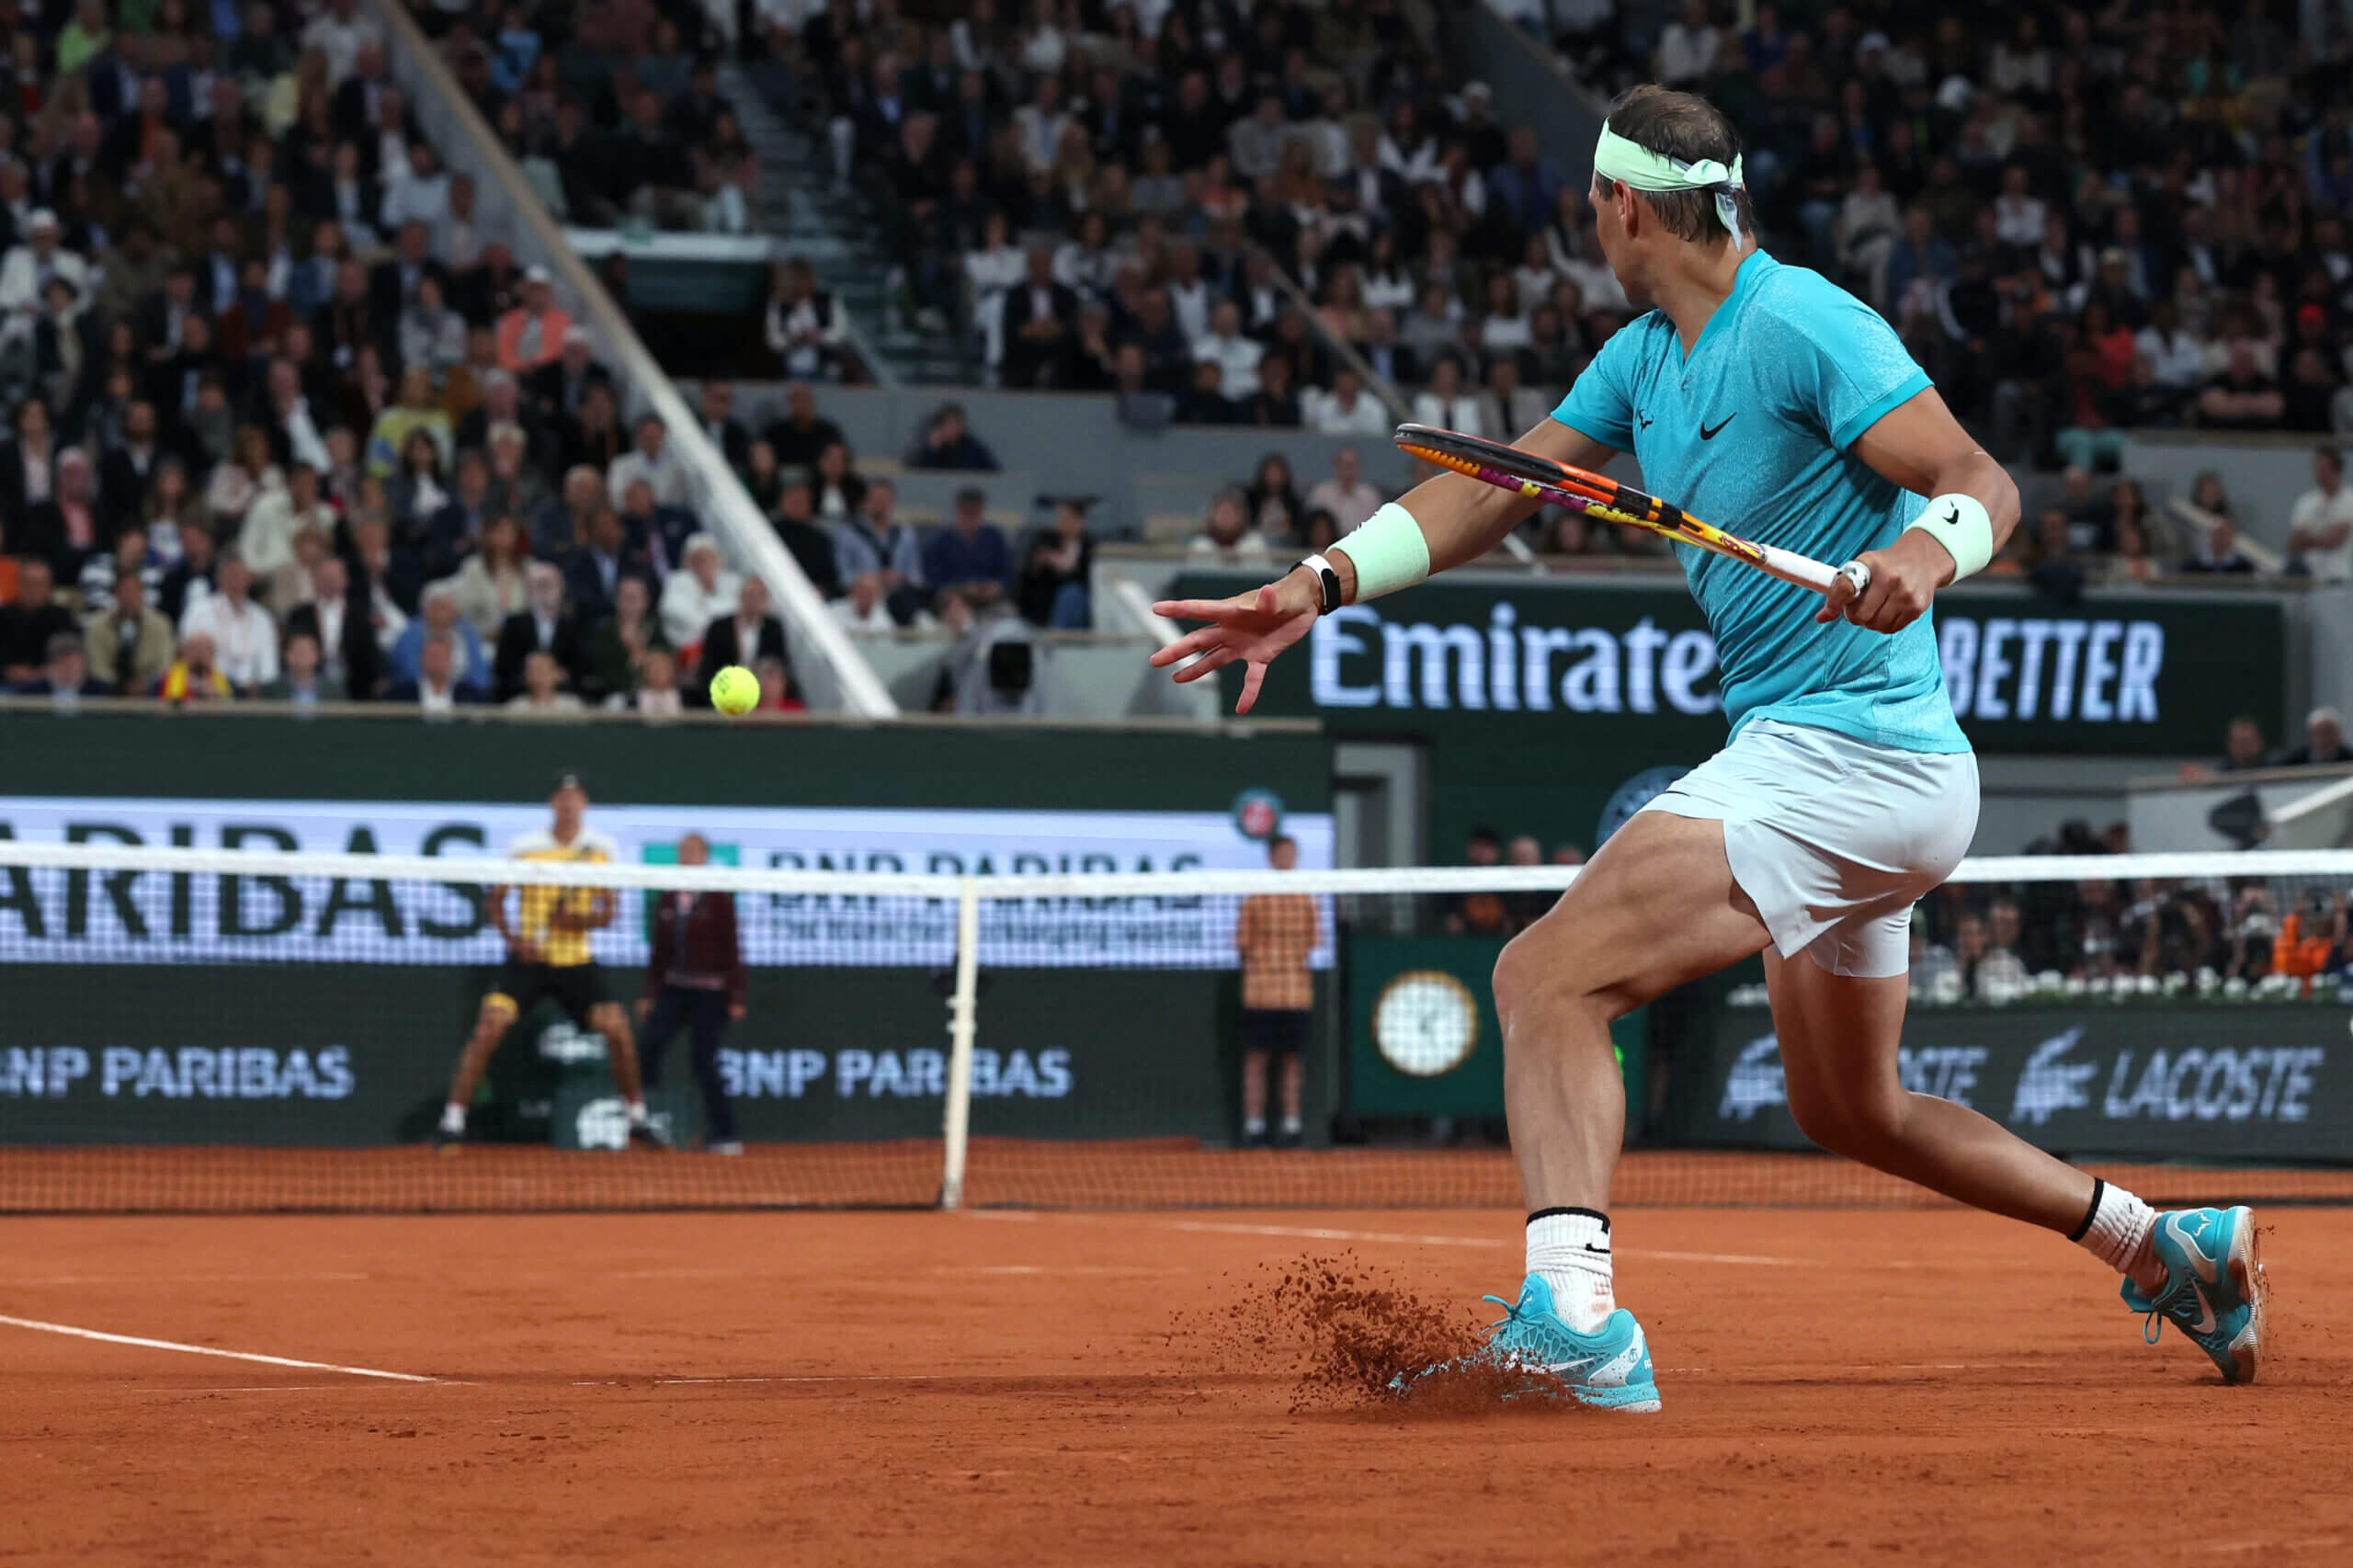 French Open Day 2: Rafael Nadal sees his past and future, Bianca Andreescu returns